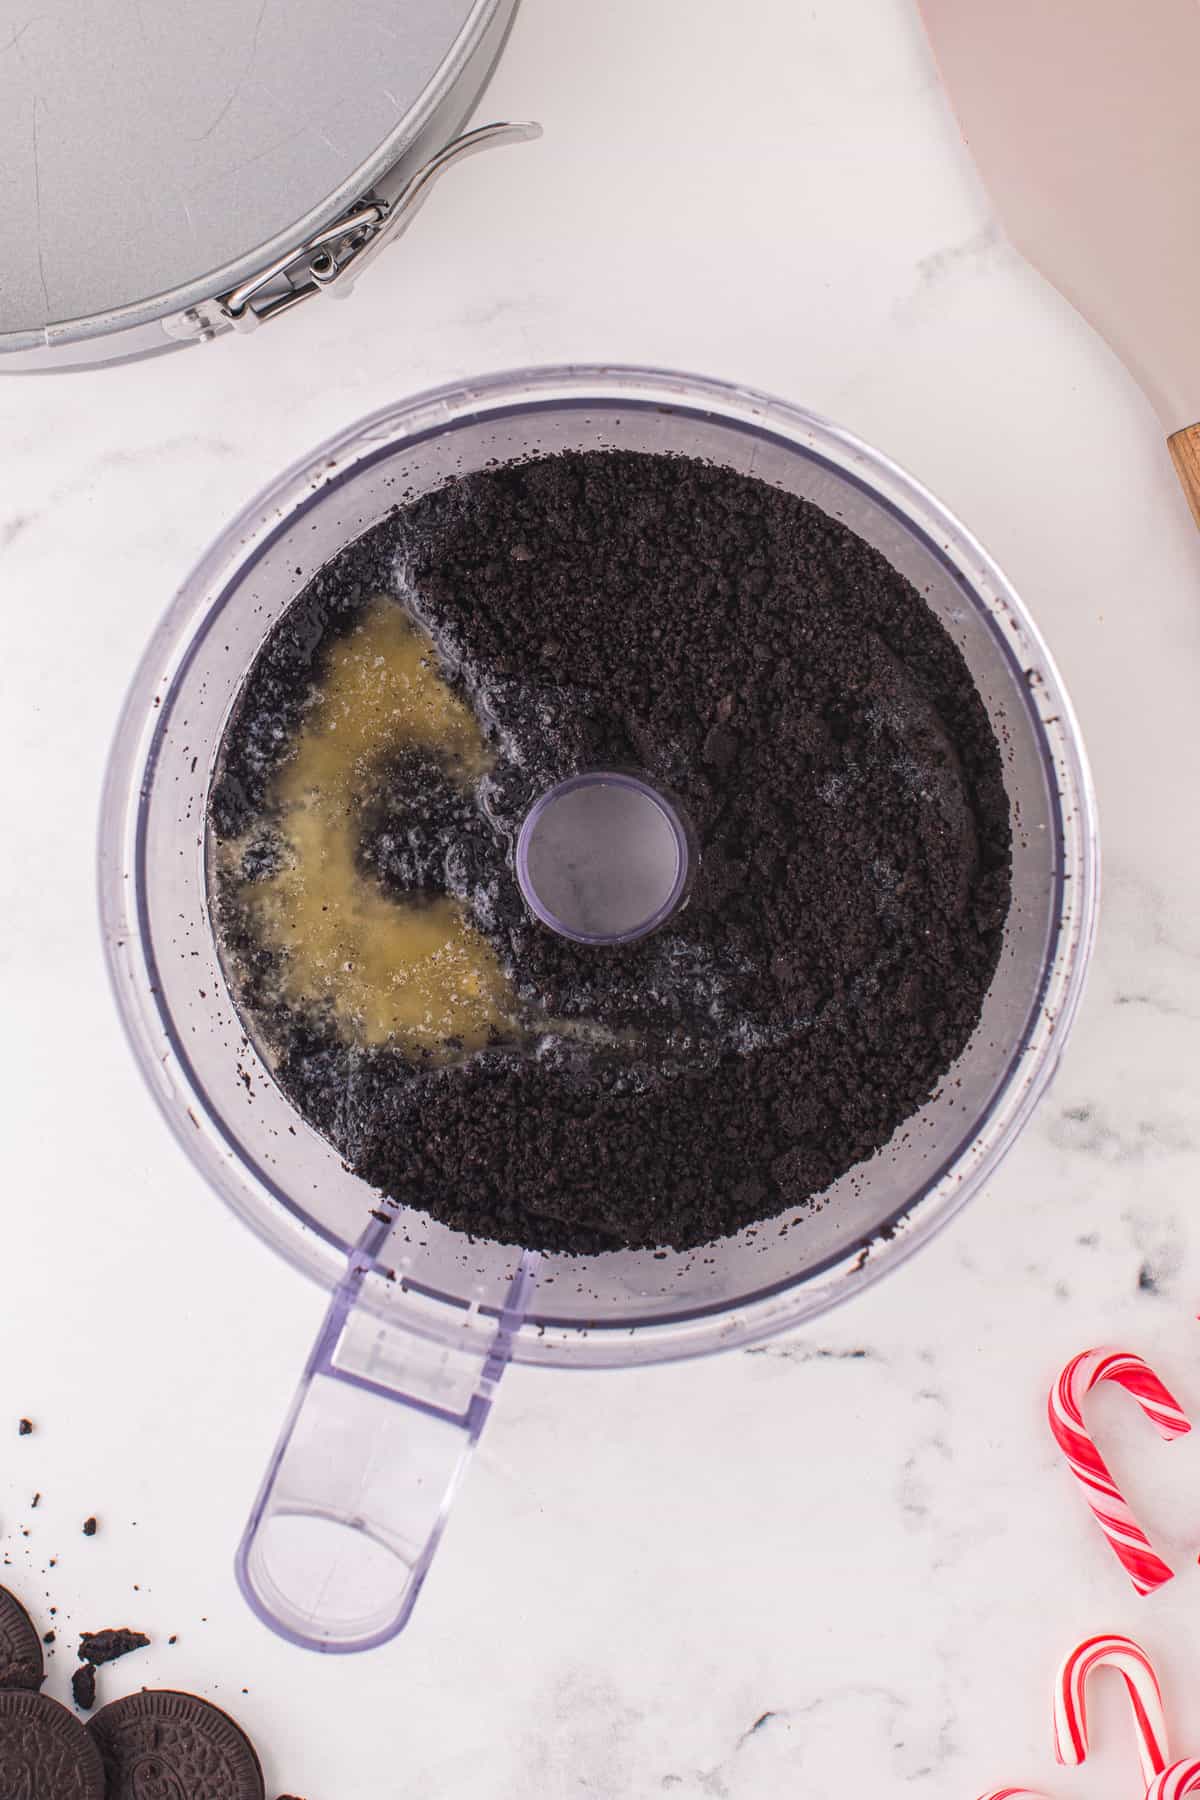 Butter and chopped Oreos in food processor